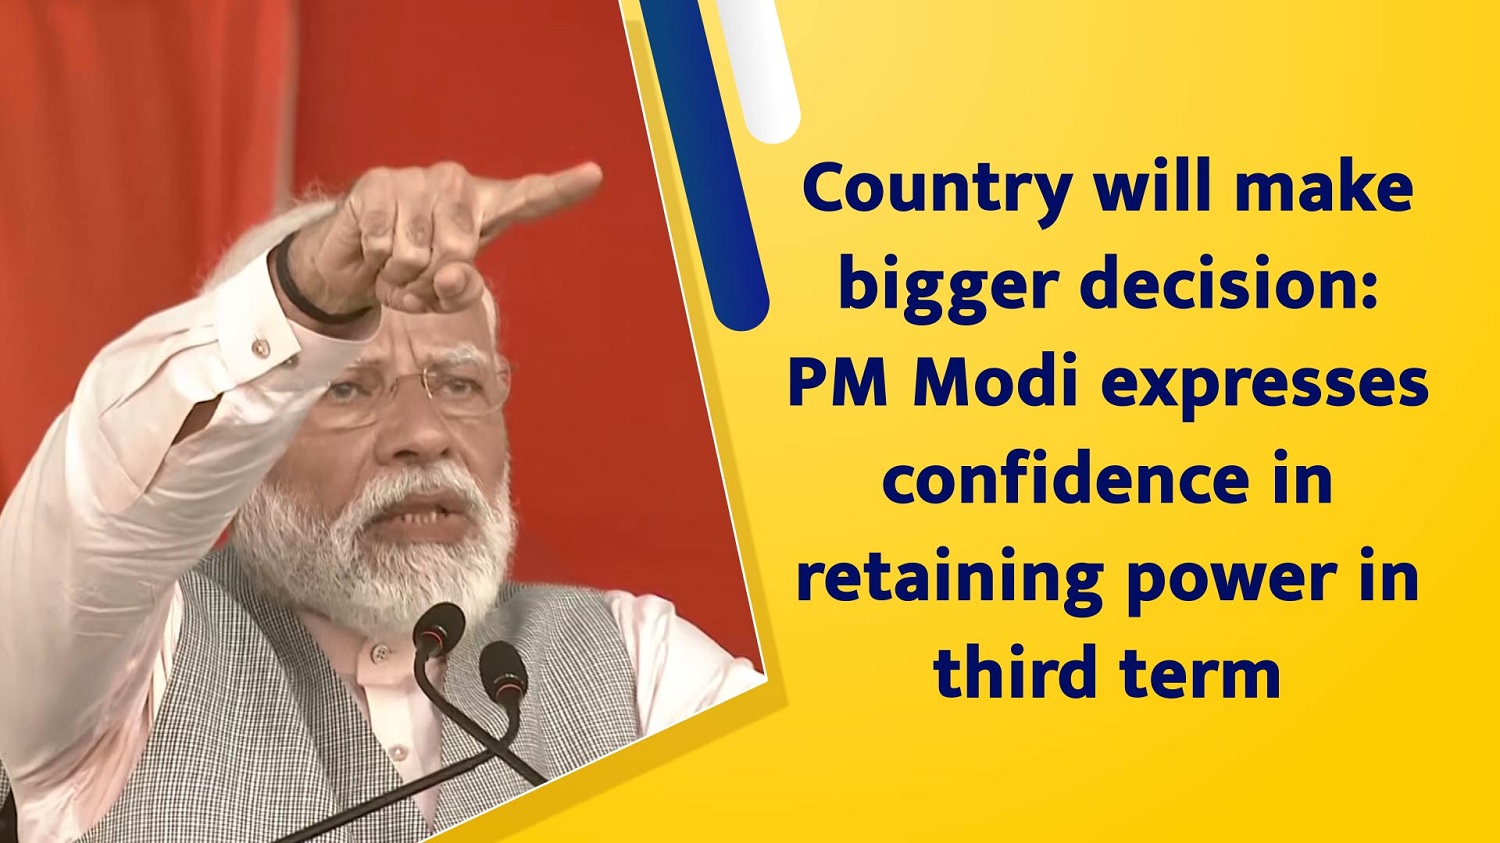 Country will make bigger decision  PM Narendra Modi expresses confidence in retaining power in third term